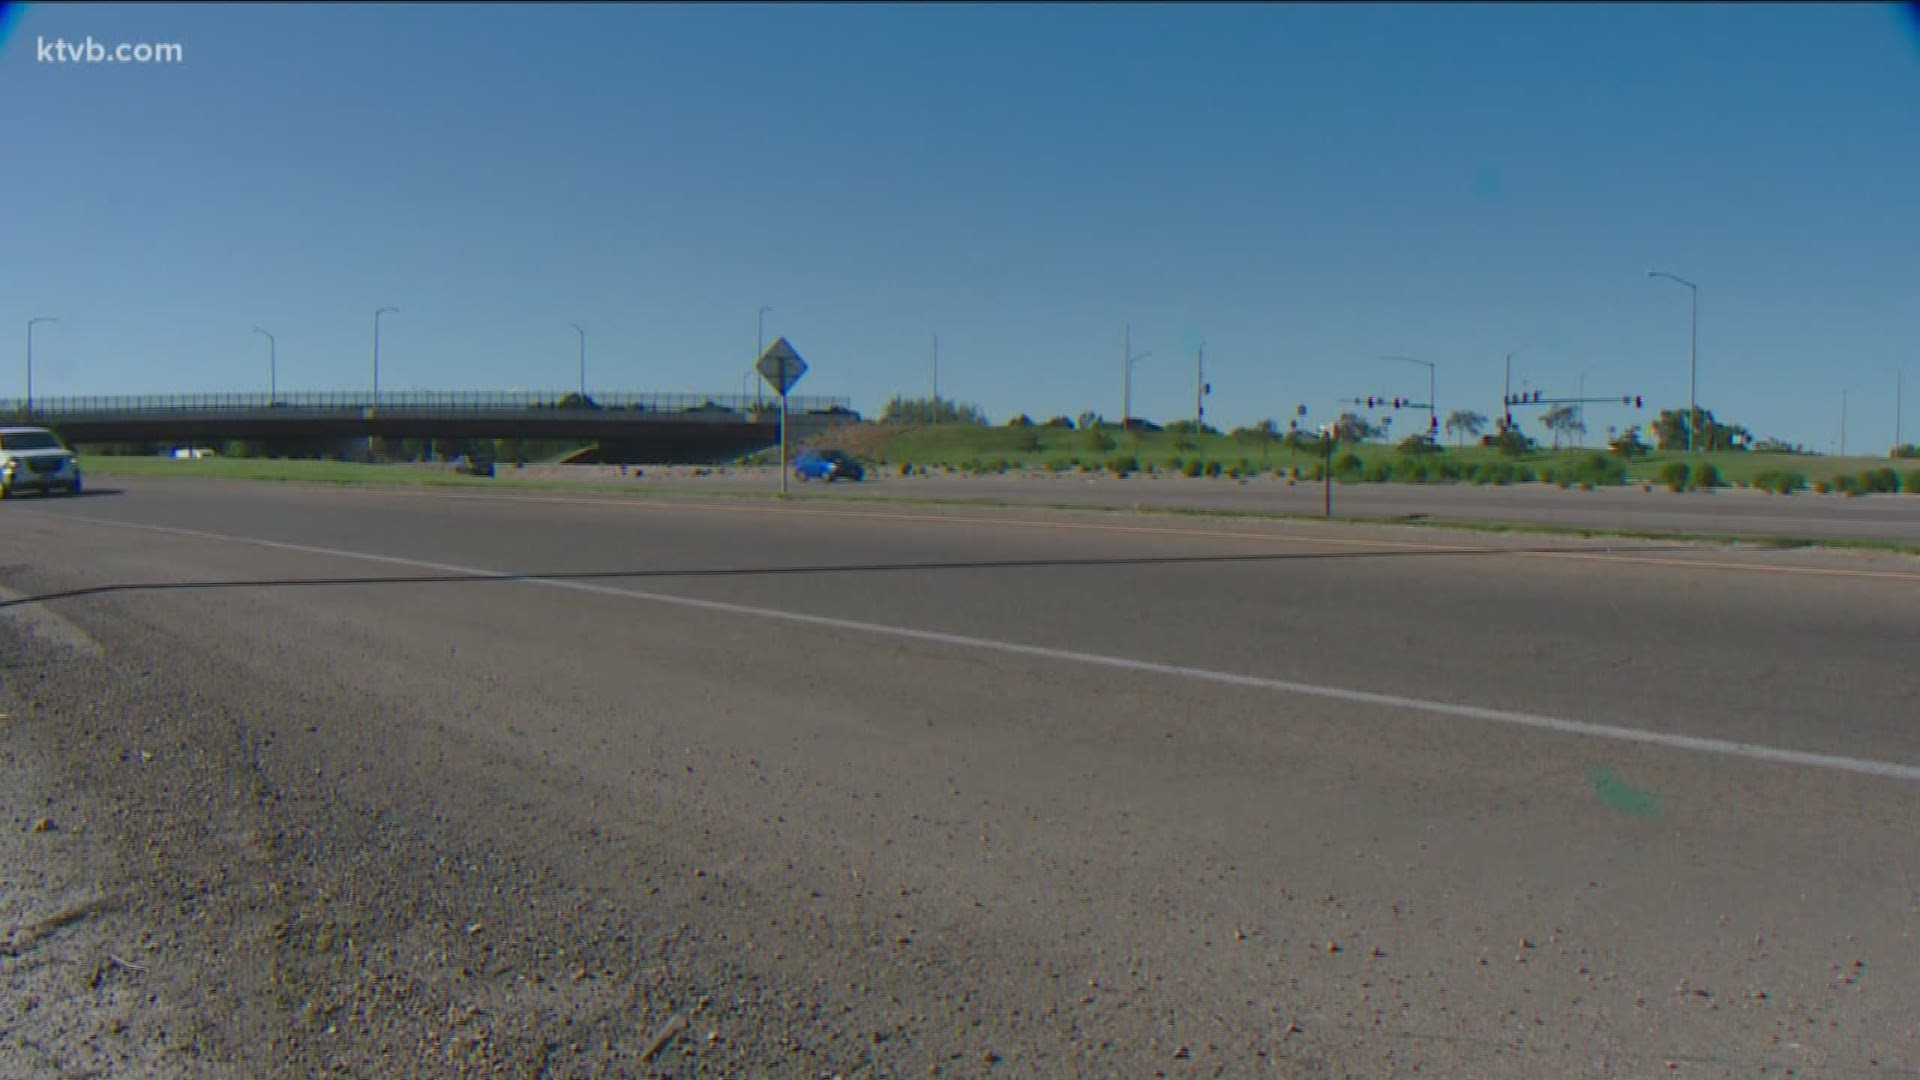 To accommodate growth expected over the next 20 years, the Idaho Transportation Department is looking at widening Interstate 84 through Caldwell.